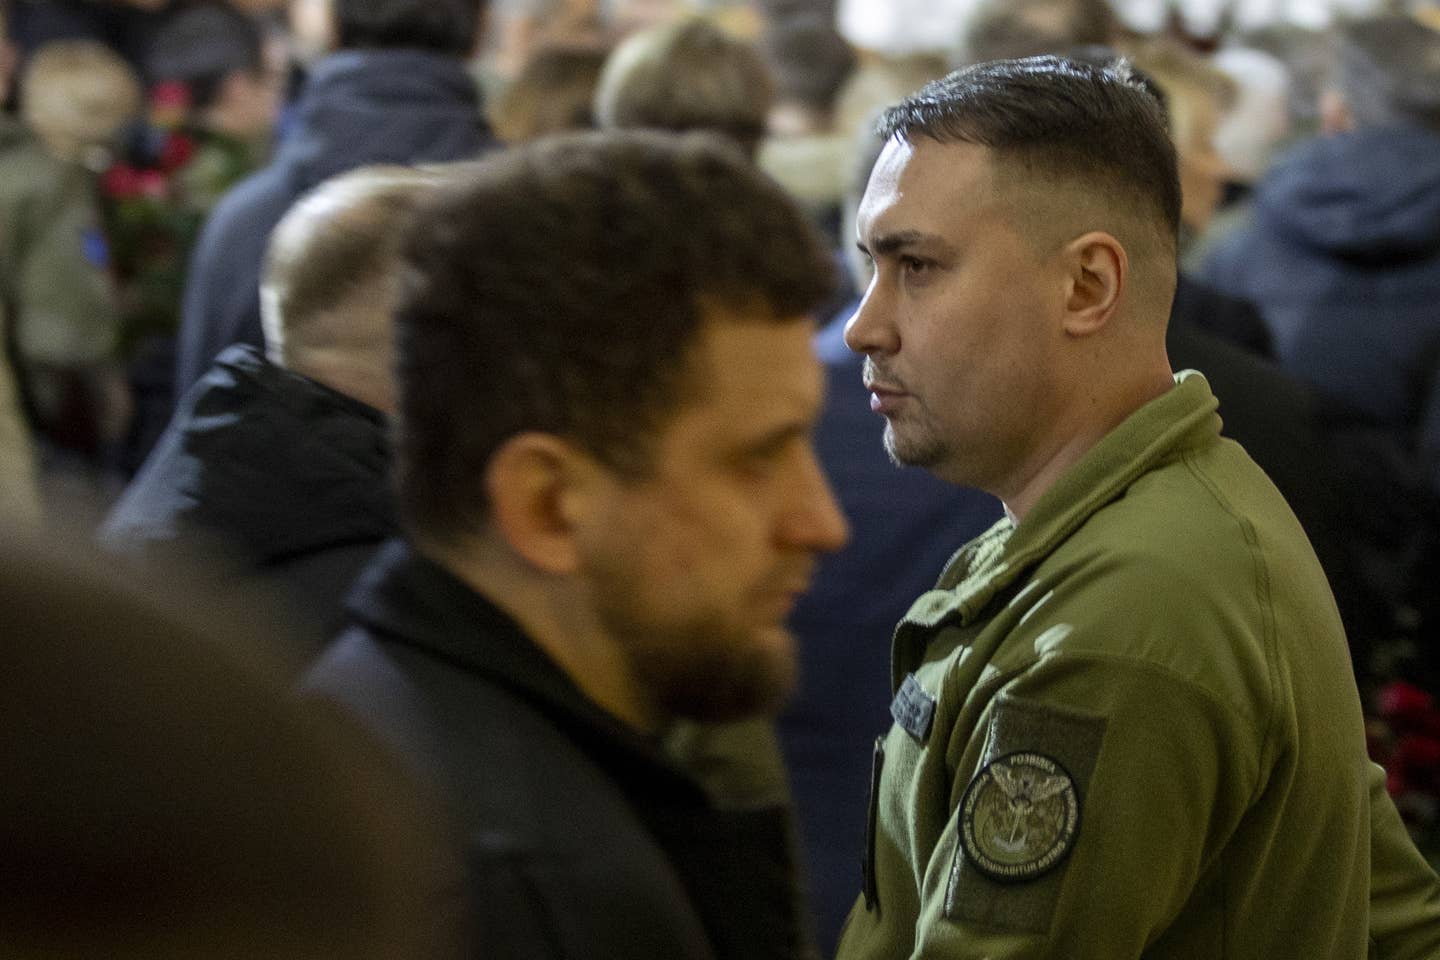 Maj. Gen. Kyrylo Budanov attends the funeral ceremony held for the victims of a helicopter crash in the city of Brovary, on Jan. 21, 2023, in Kyiv, Ukraine. (Photo by Mustafa Ciftci/Anadolu Agency via Getty Images)